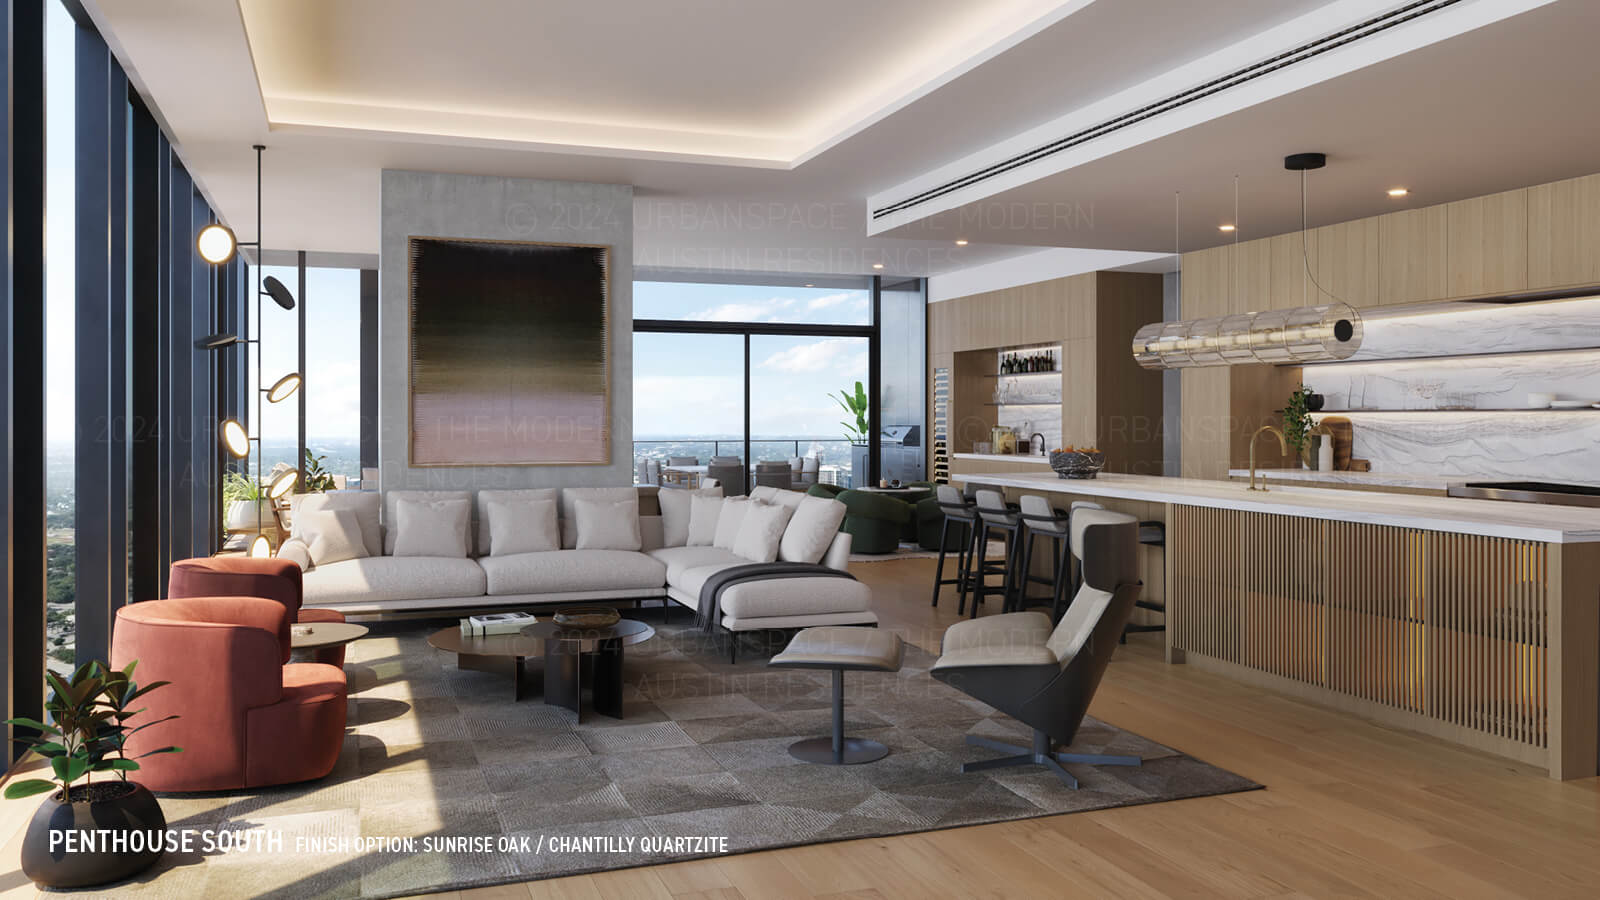 Modern Austin Residences Penthouse South floor plan - living room in Chantilly Quartzite finish